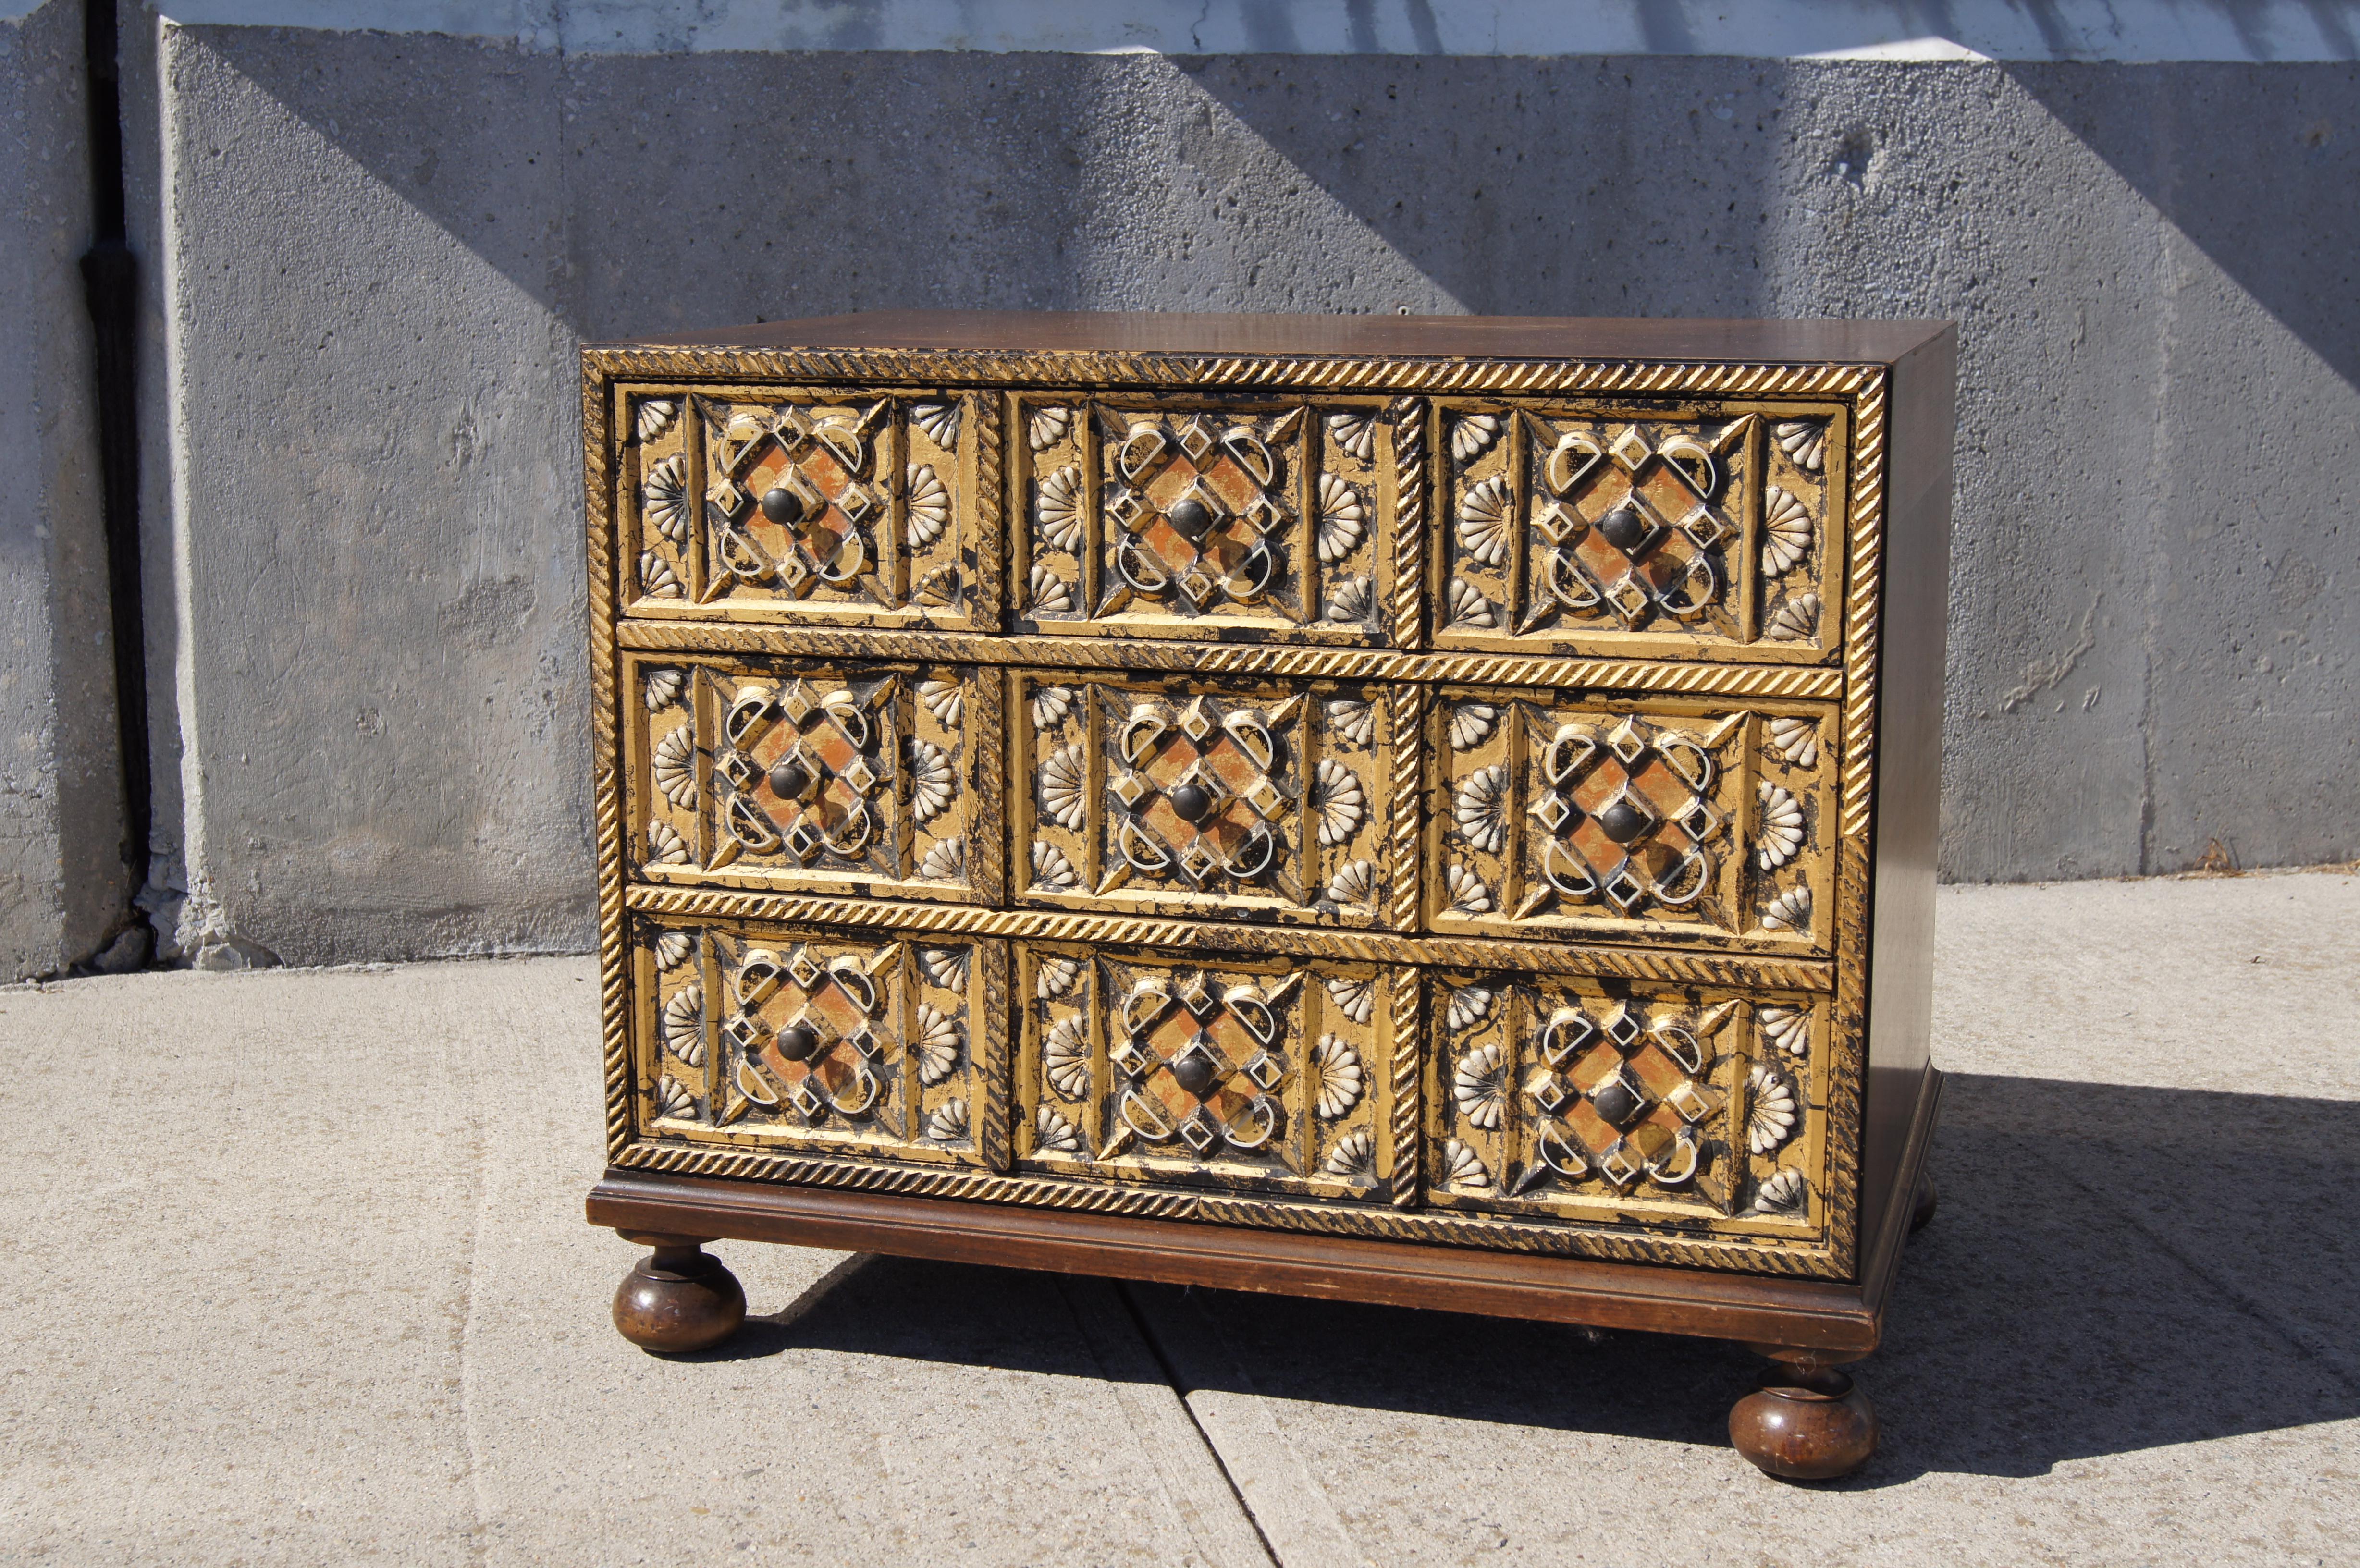 Created by the William A. Berkey Furniture Co. for its parent company Widdicomb, this charming revival dresser sets a walnut case on sturdy round feet. The three drawers feature ornately carved, gold-leafed fronts.

Maker's mark inside drawer.